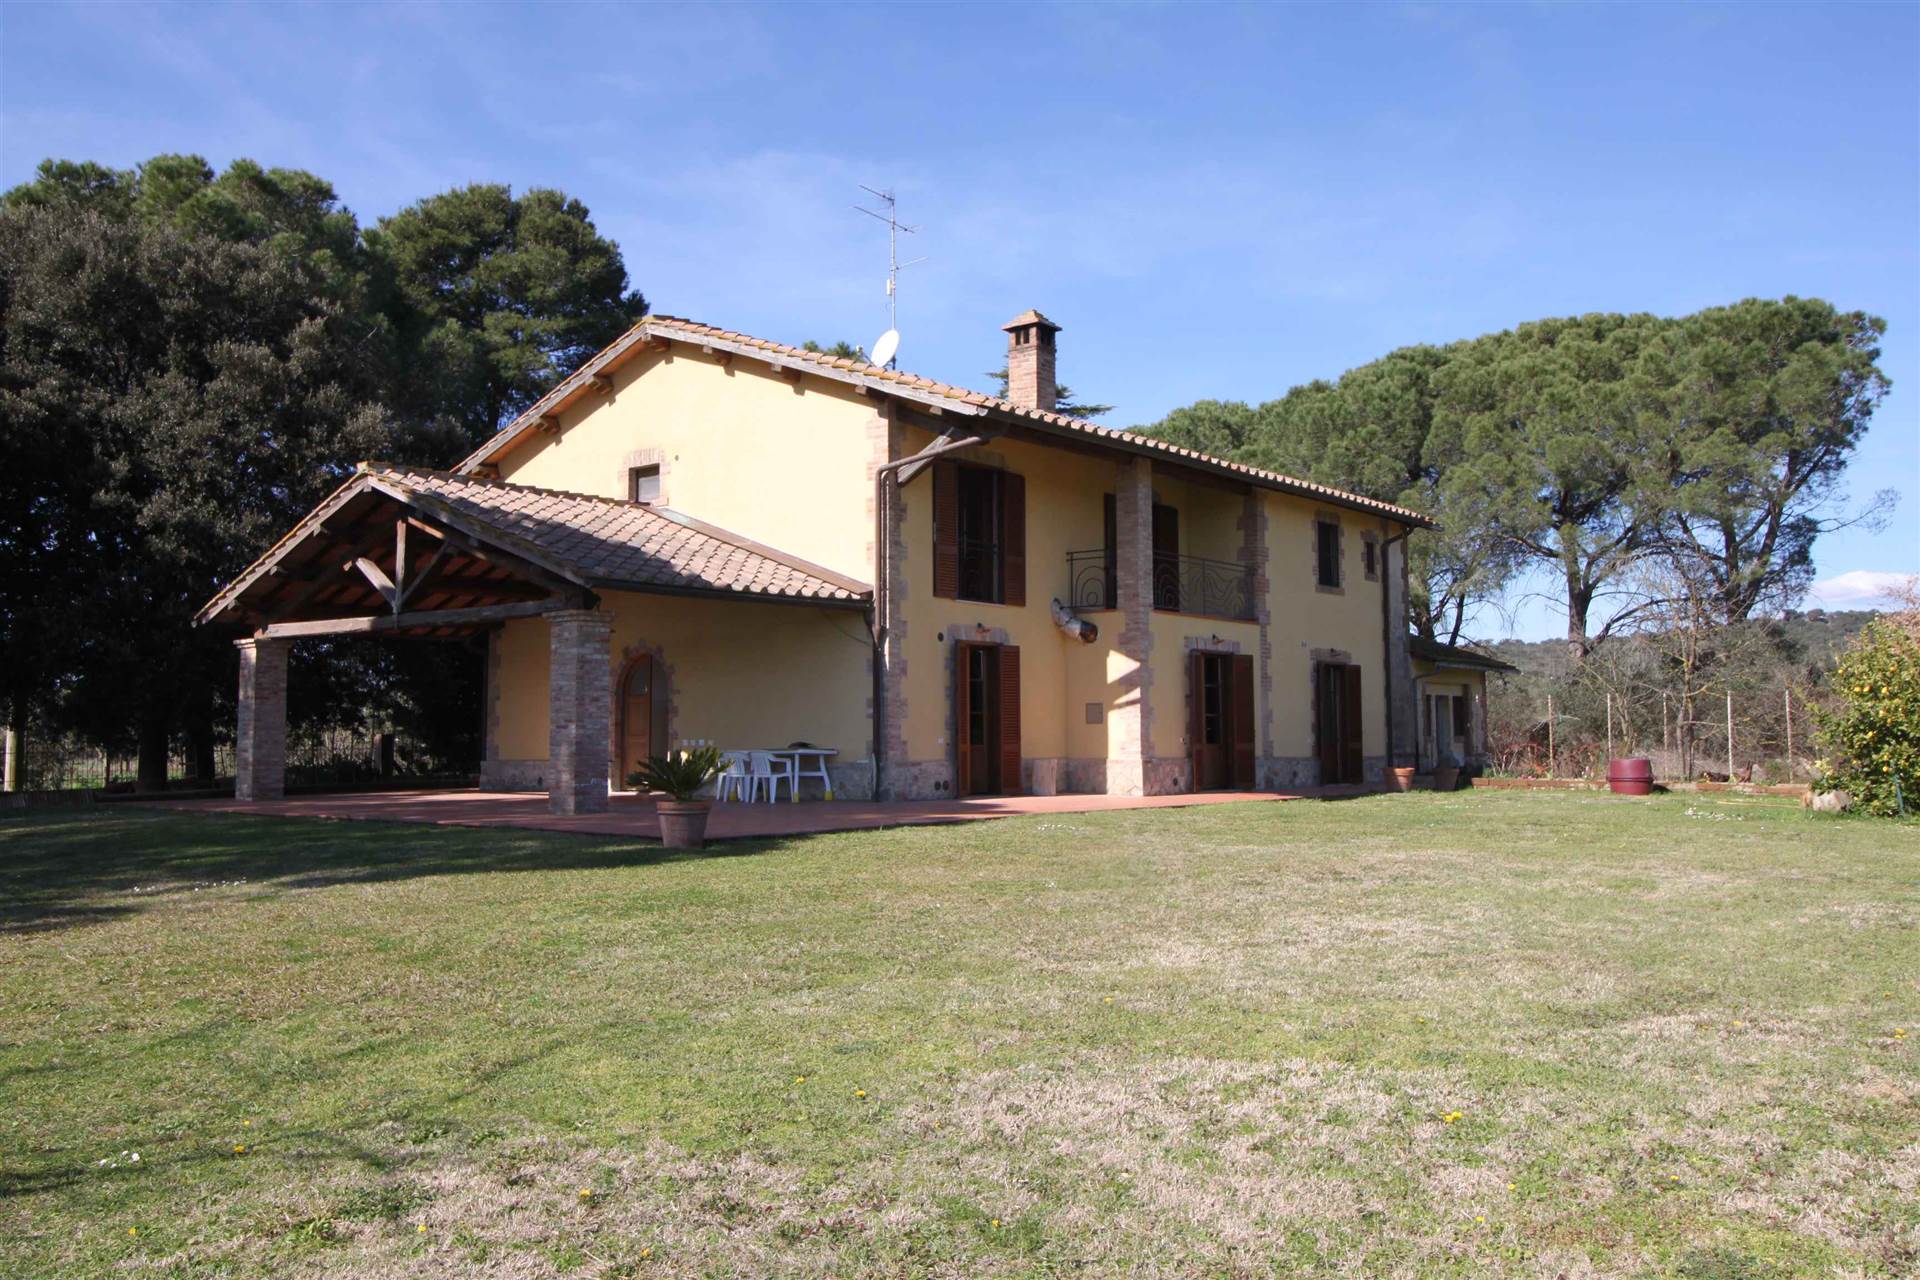 ROSELLE, GROSSETO, Villa for sale of 270 Sq. mt., Restored, Heating Individual heating system, Energetic class: A1, placed at Ground on 1, composed by: 10 Rooms, Separate kitchen, , 6 Bedrooms, 3 